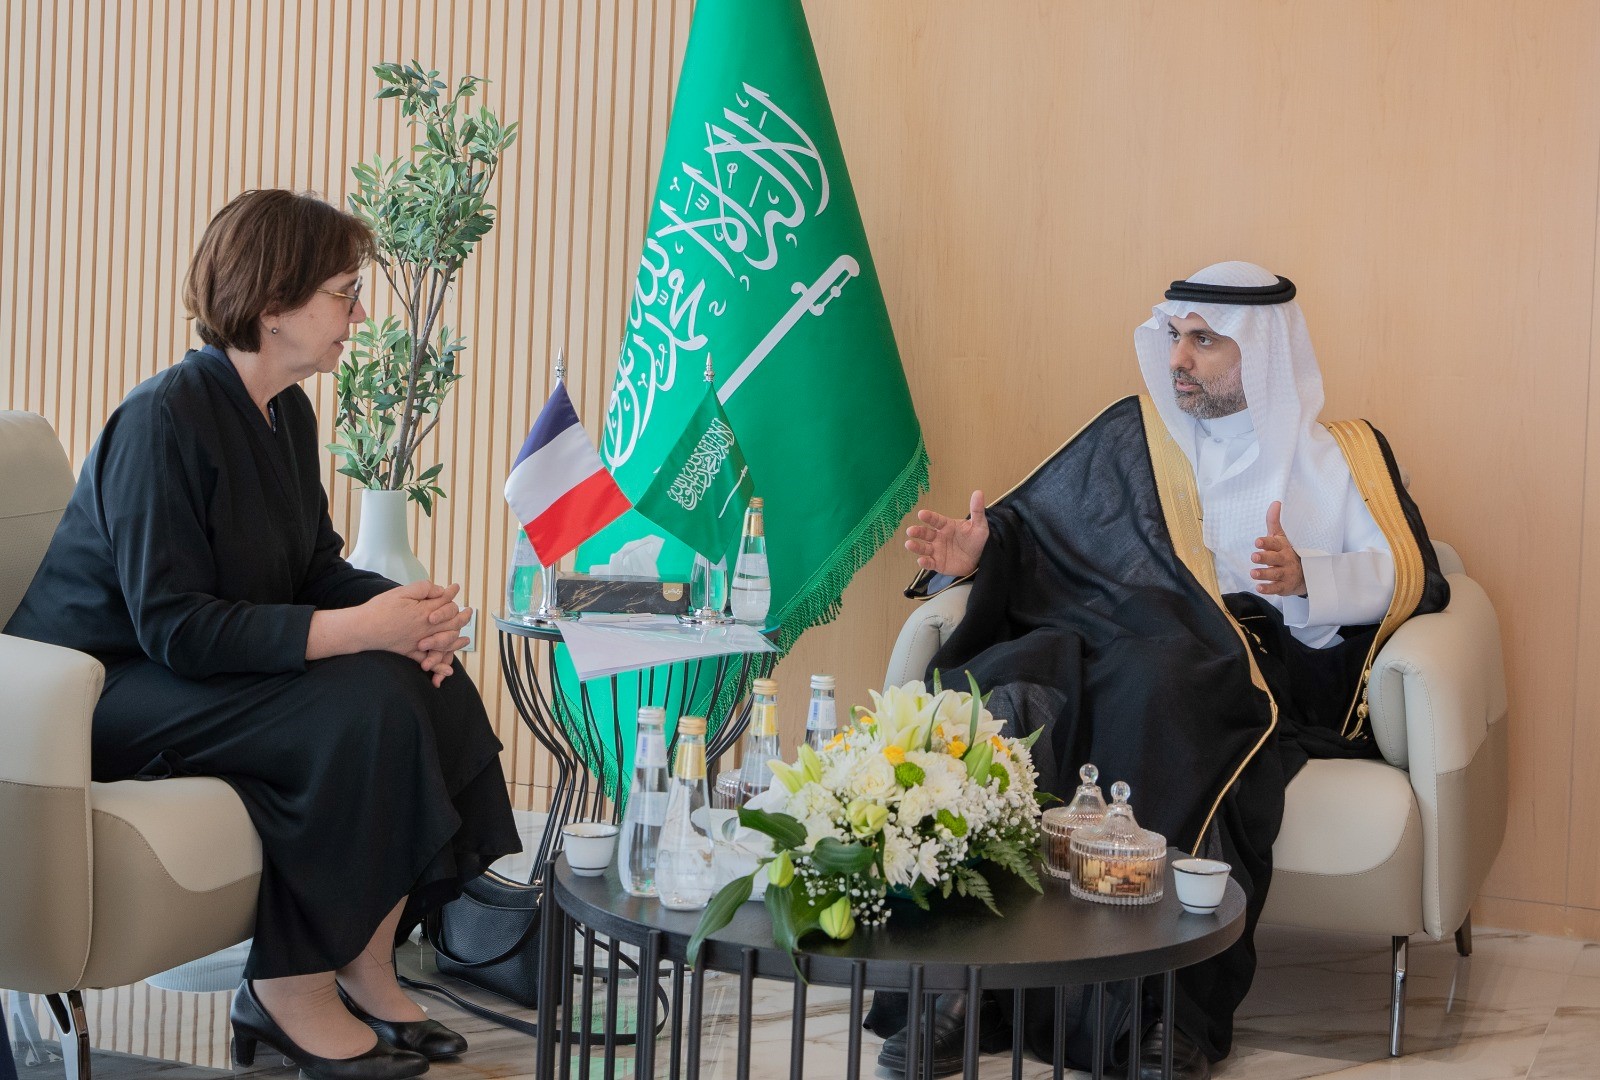 Minister Of Health Meets with the Candidate for the Position of Director-General of The World Organization for Animal Health